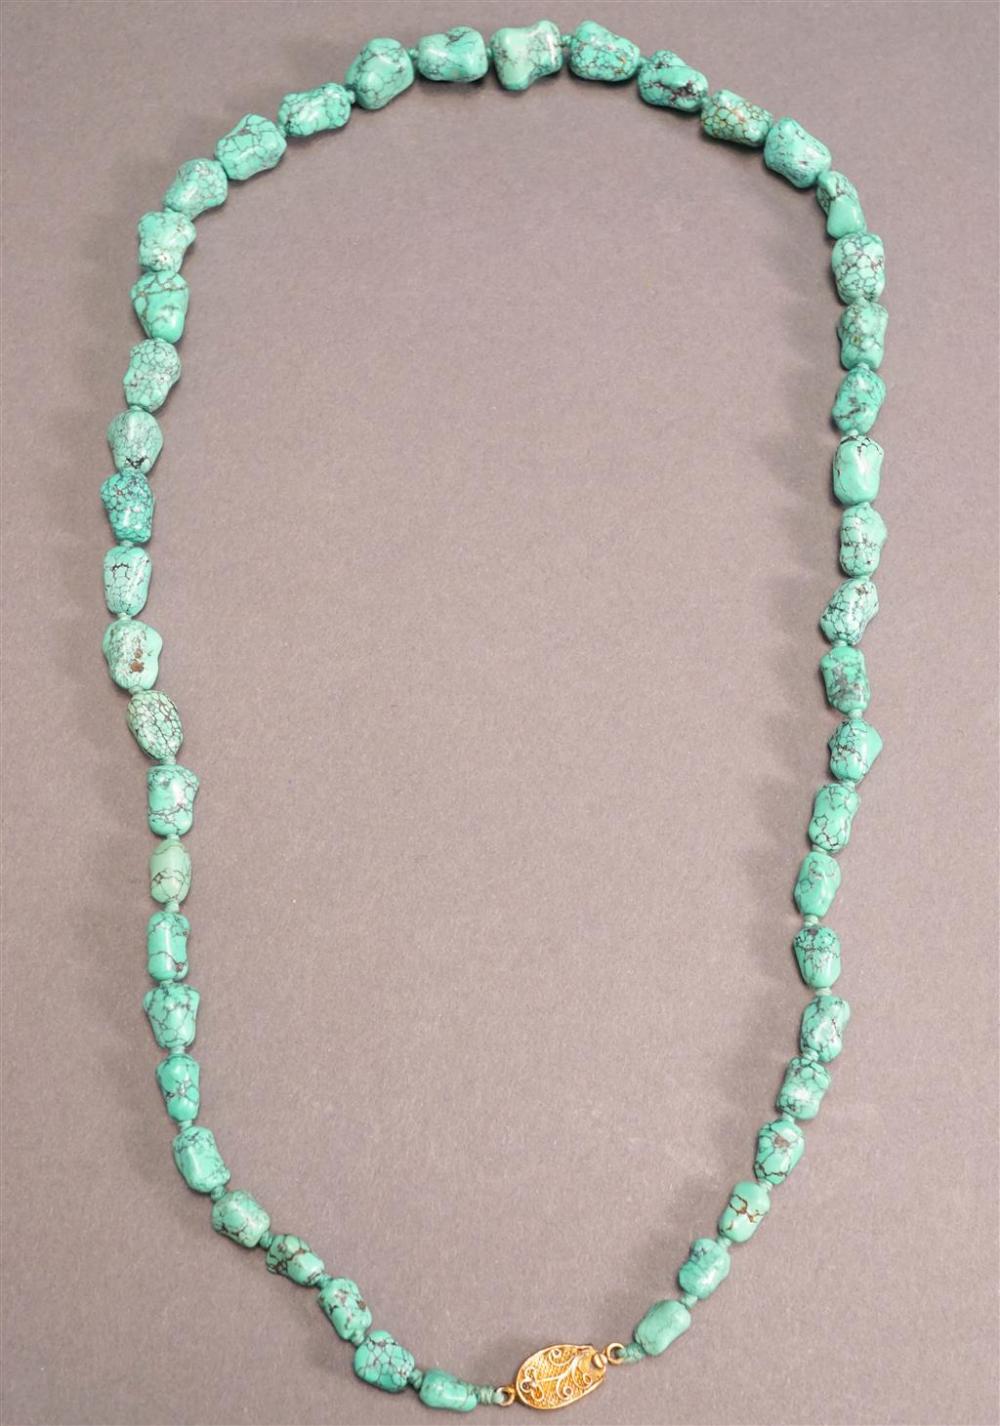 CHINESE TURQUOISE NUGGET NECKLACE,